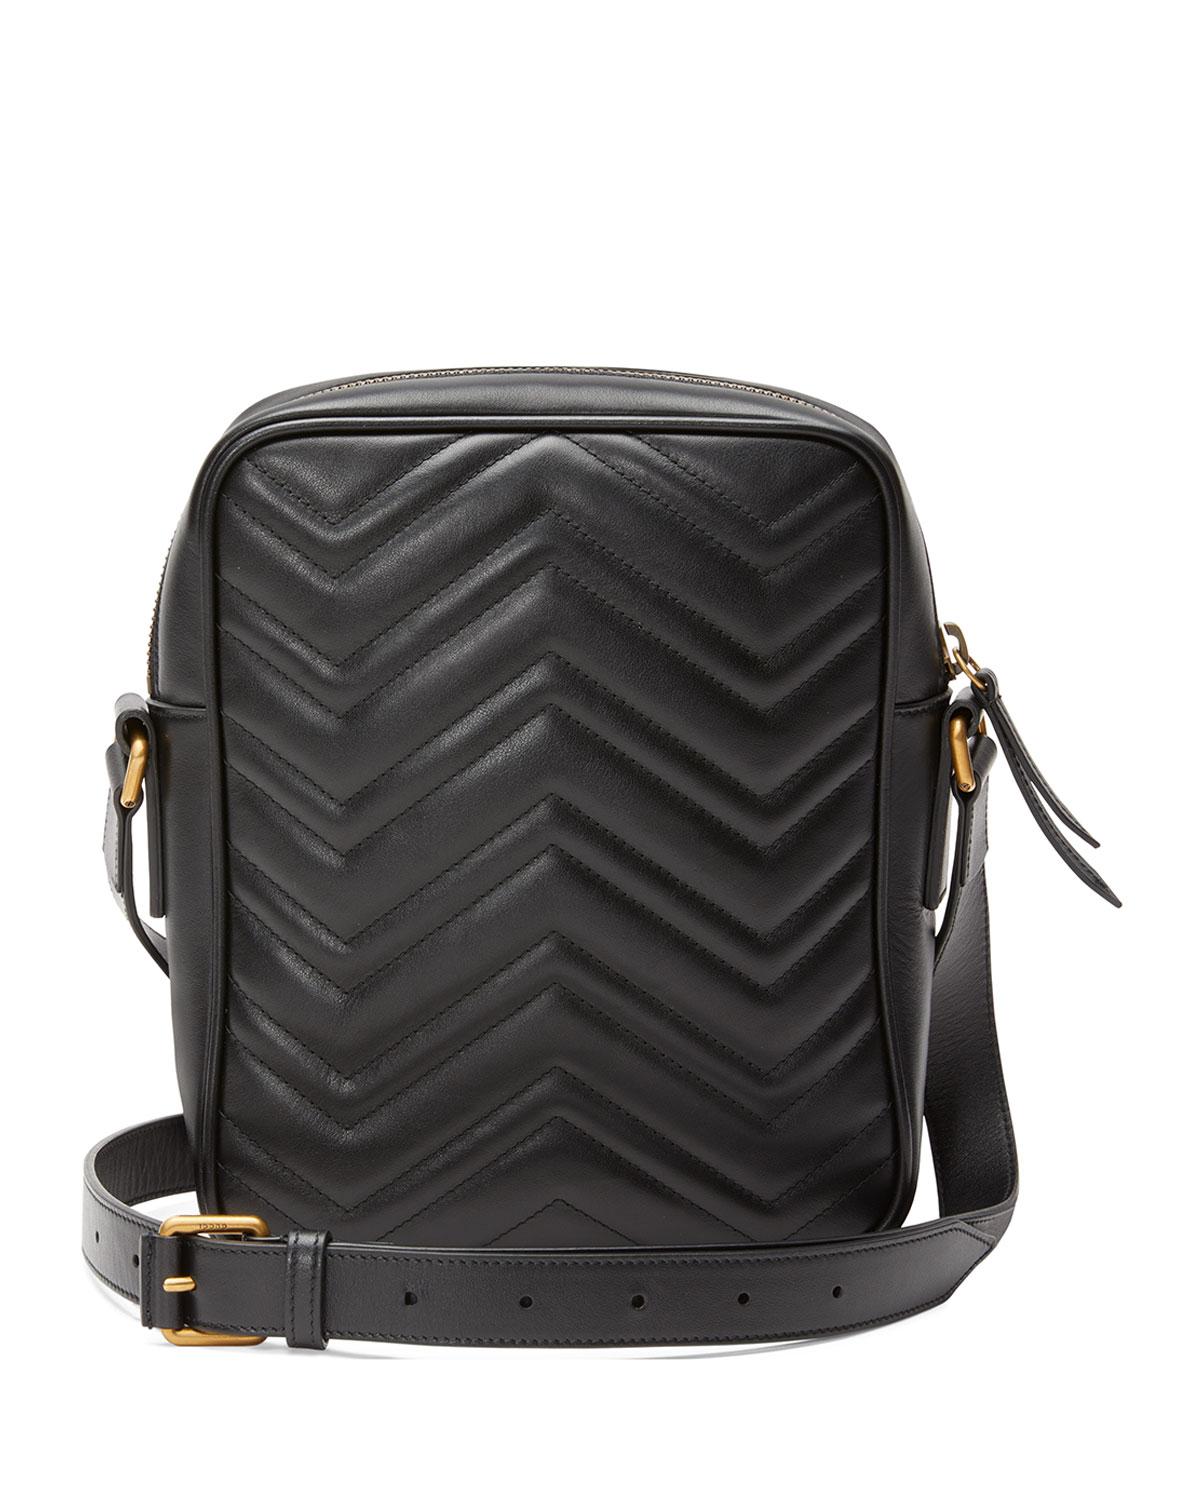 Gg Marmont Small Black Leather Cross-body Bag | Paul Smith